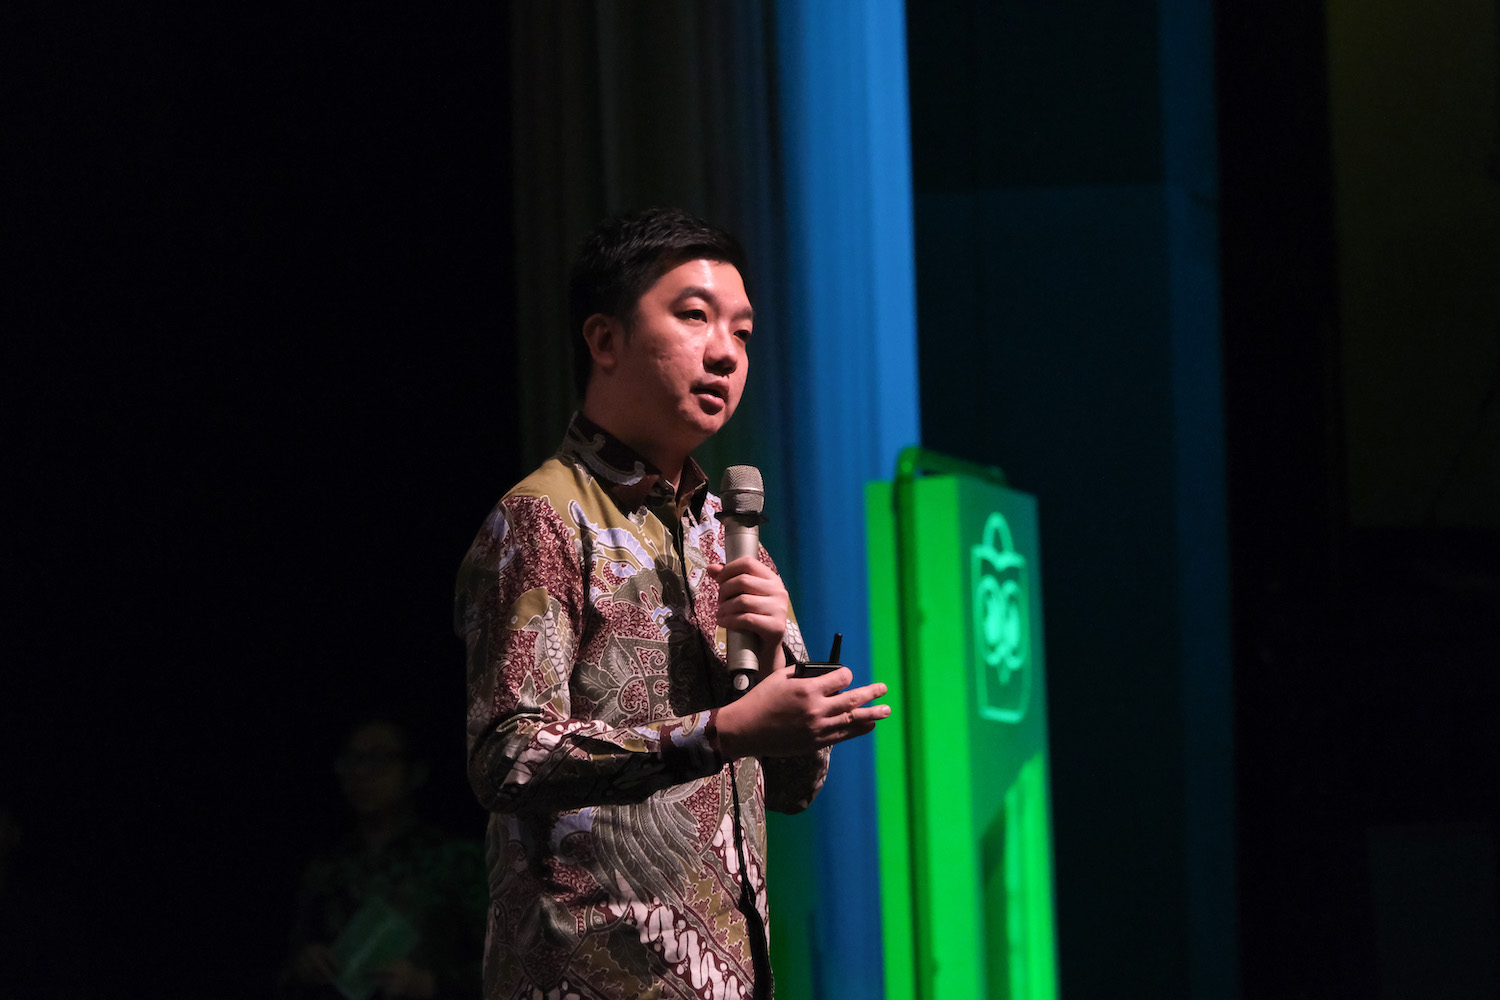 Tokopedia’s IPO will pave the way for Indonesian tech companies to follow suit